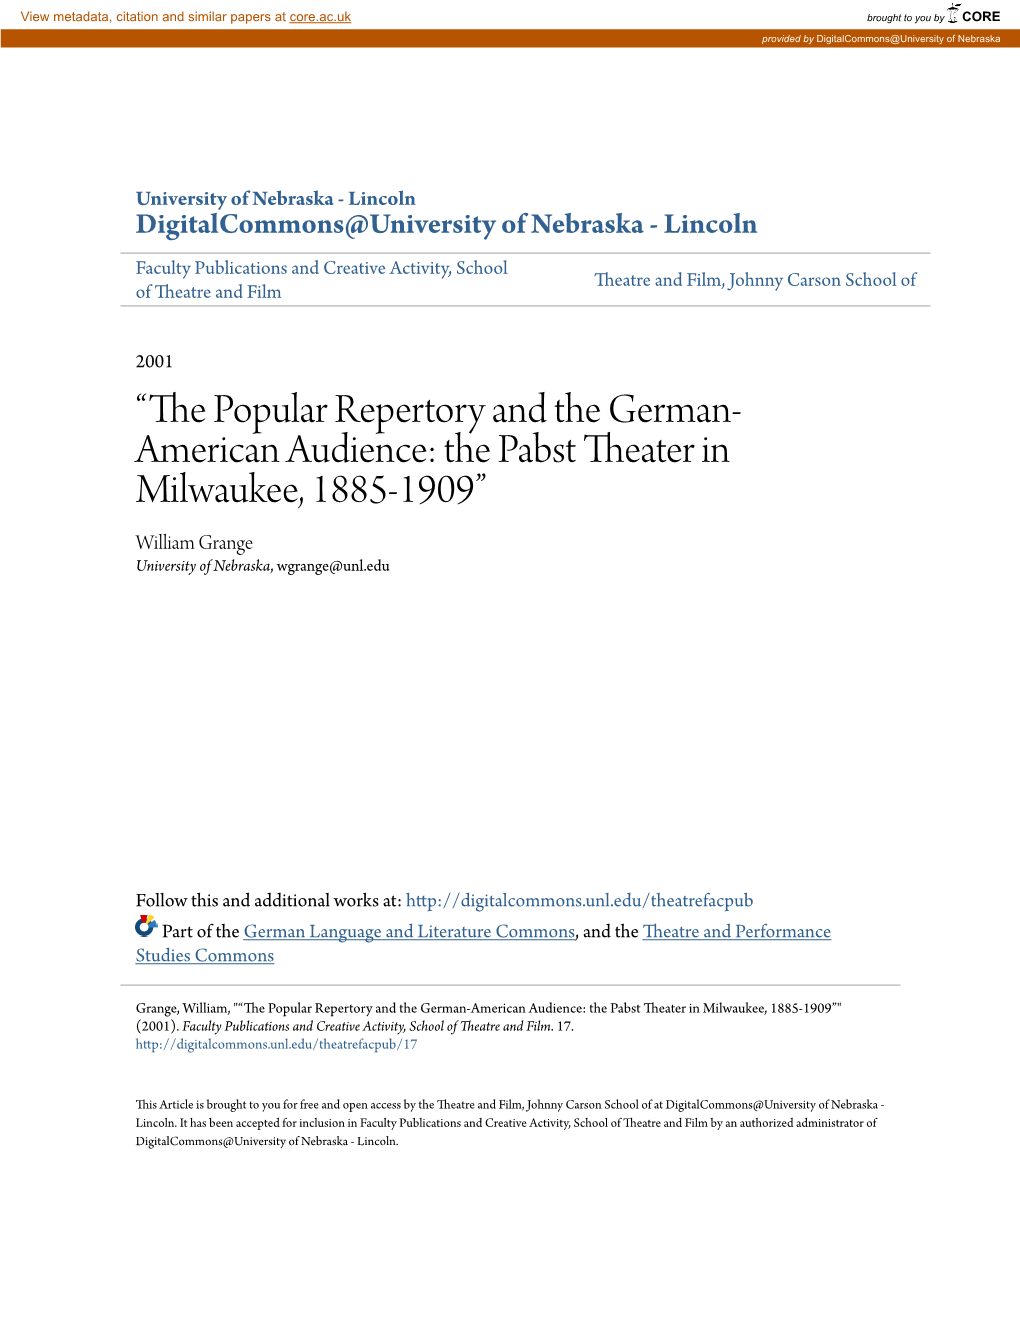 Â•Œthe Popular Repertory and the German-American Audience: The